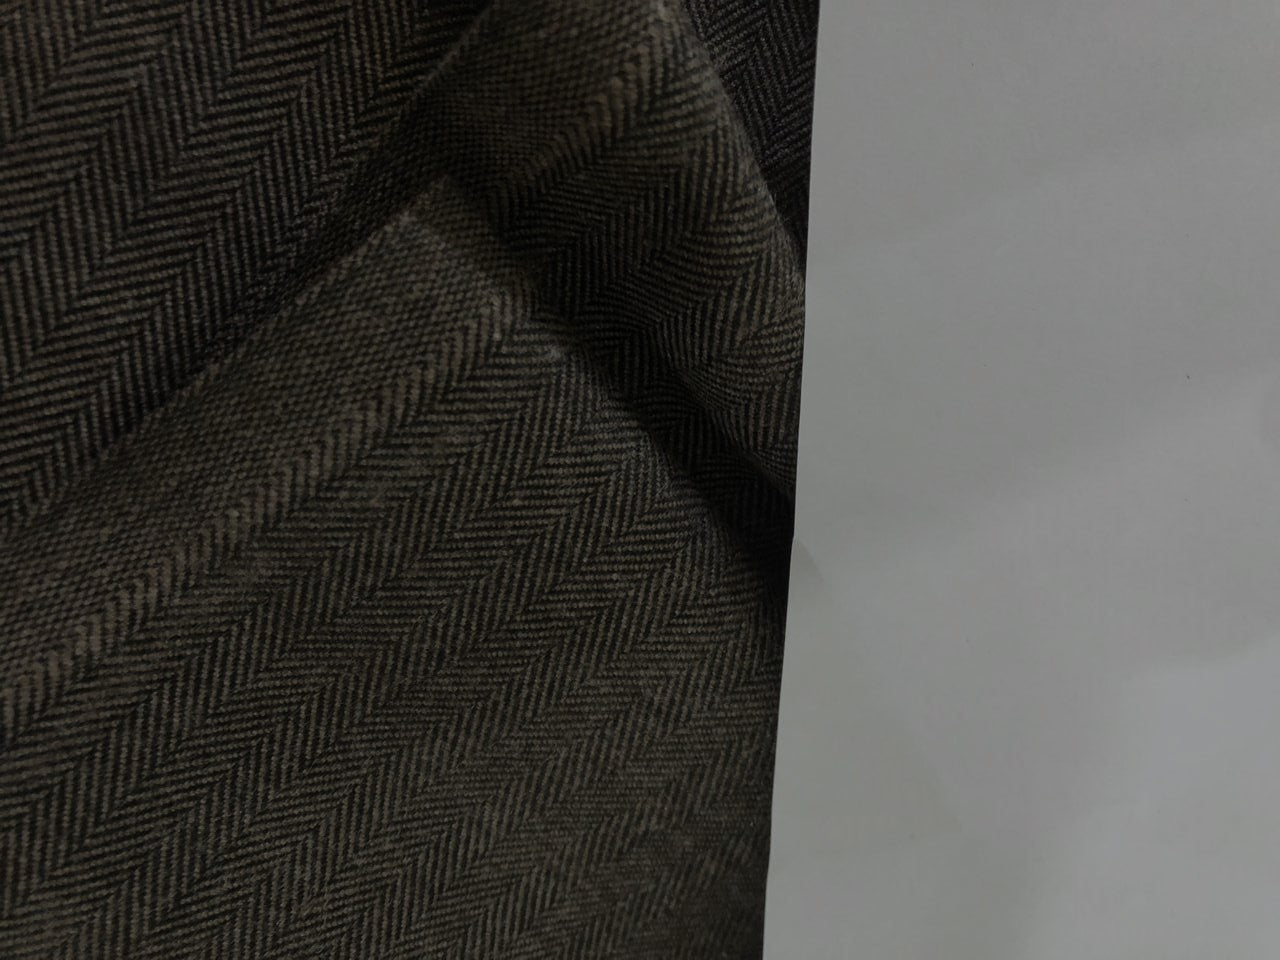 Viscose polyester blended suiting herringbone weave 58 inches wide 147 cms available in navy and brown